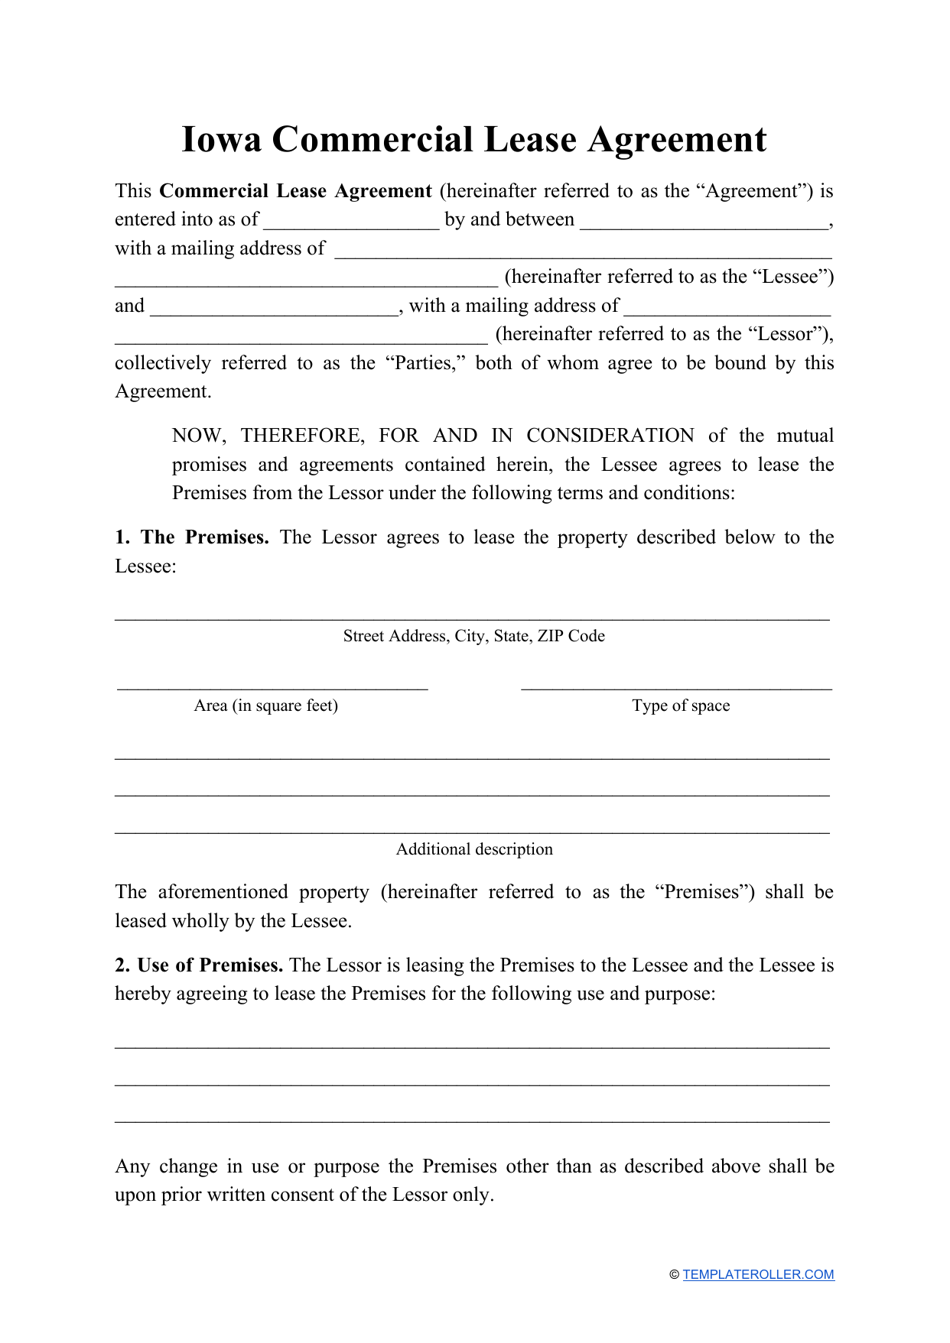 Commercial Lease Agreement Template - Iowa, Page 1